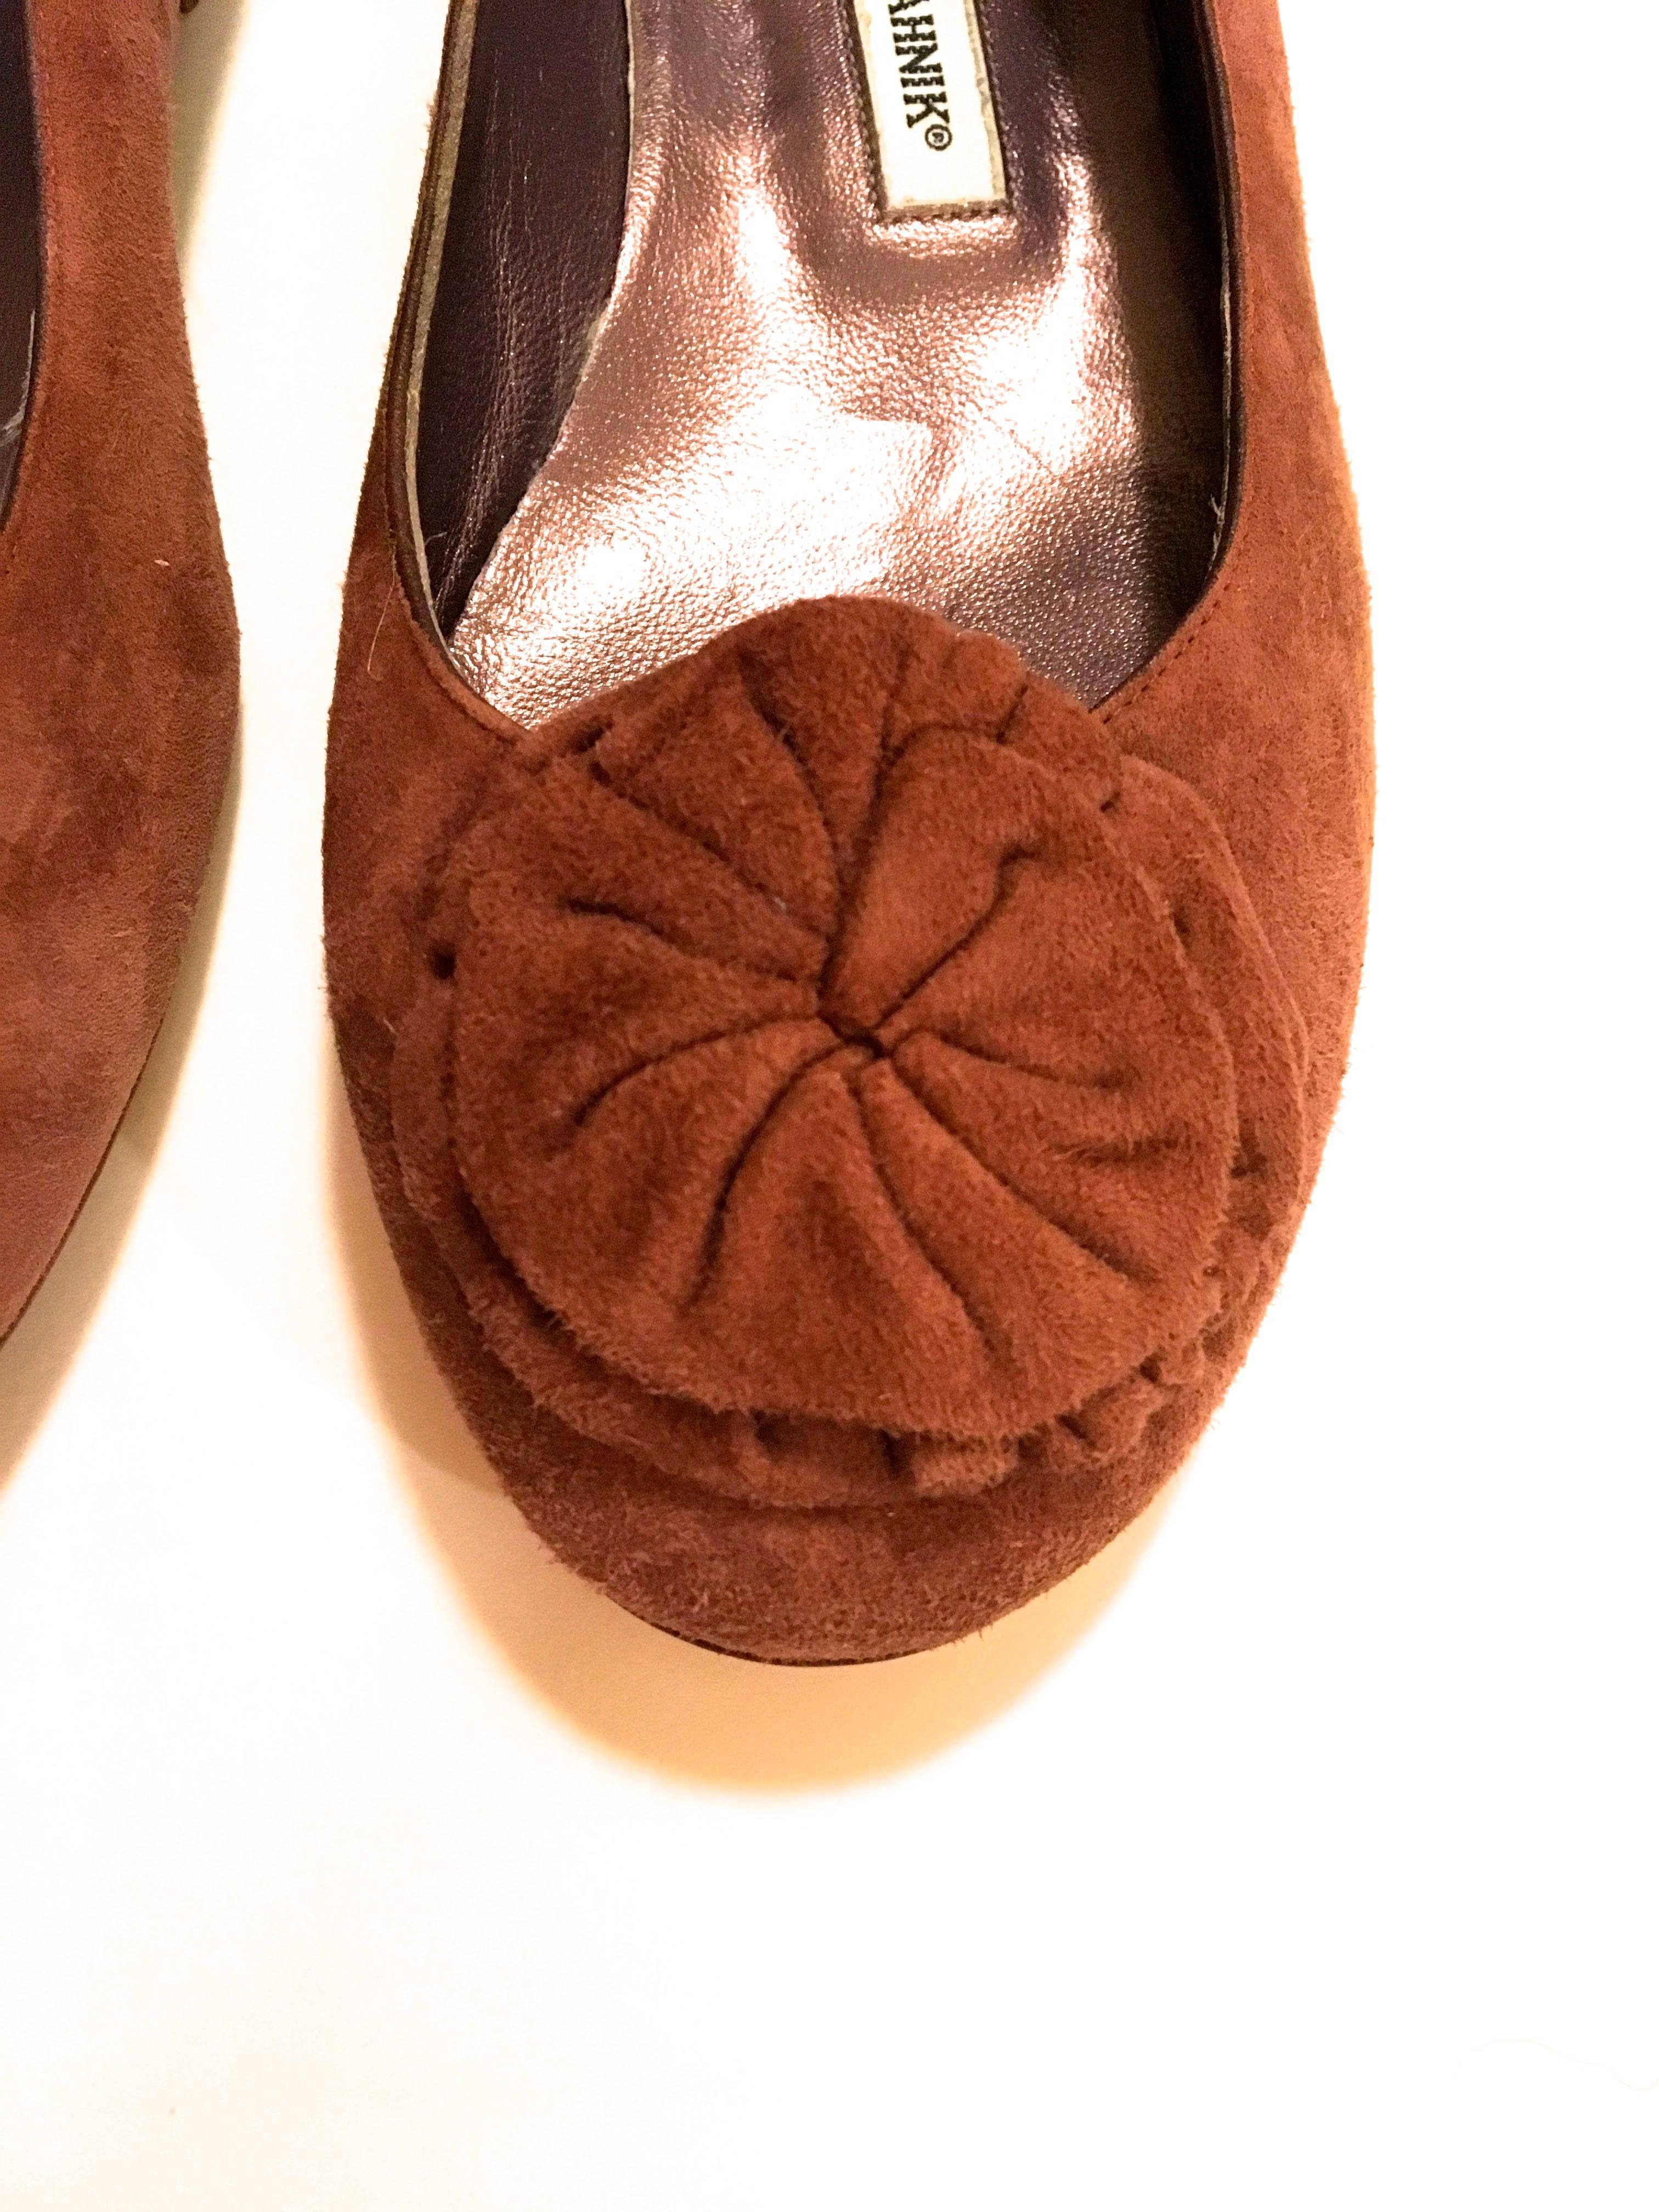 Presented here is a pair of brand new shoes from Manolo Blahnik. This beautiful pair of shoes is comprised of a soft brown suede on the exterior. The shoes are a pair of flats. Each shoe is adorned with a flower on the end of the shoe. The shoes are